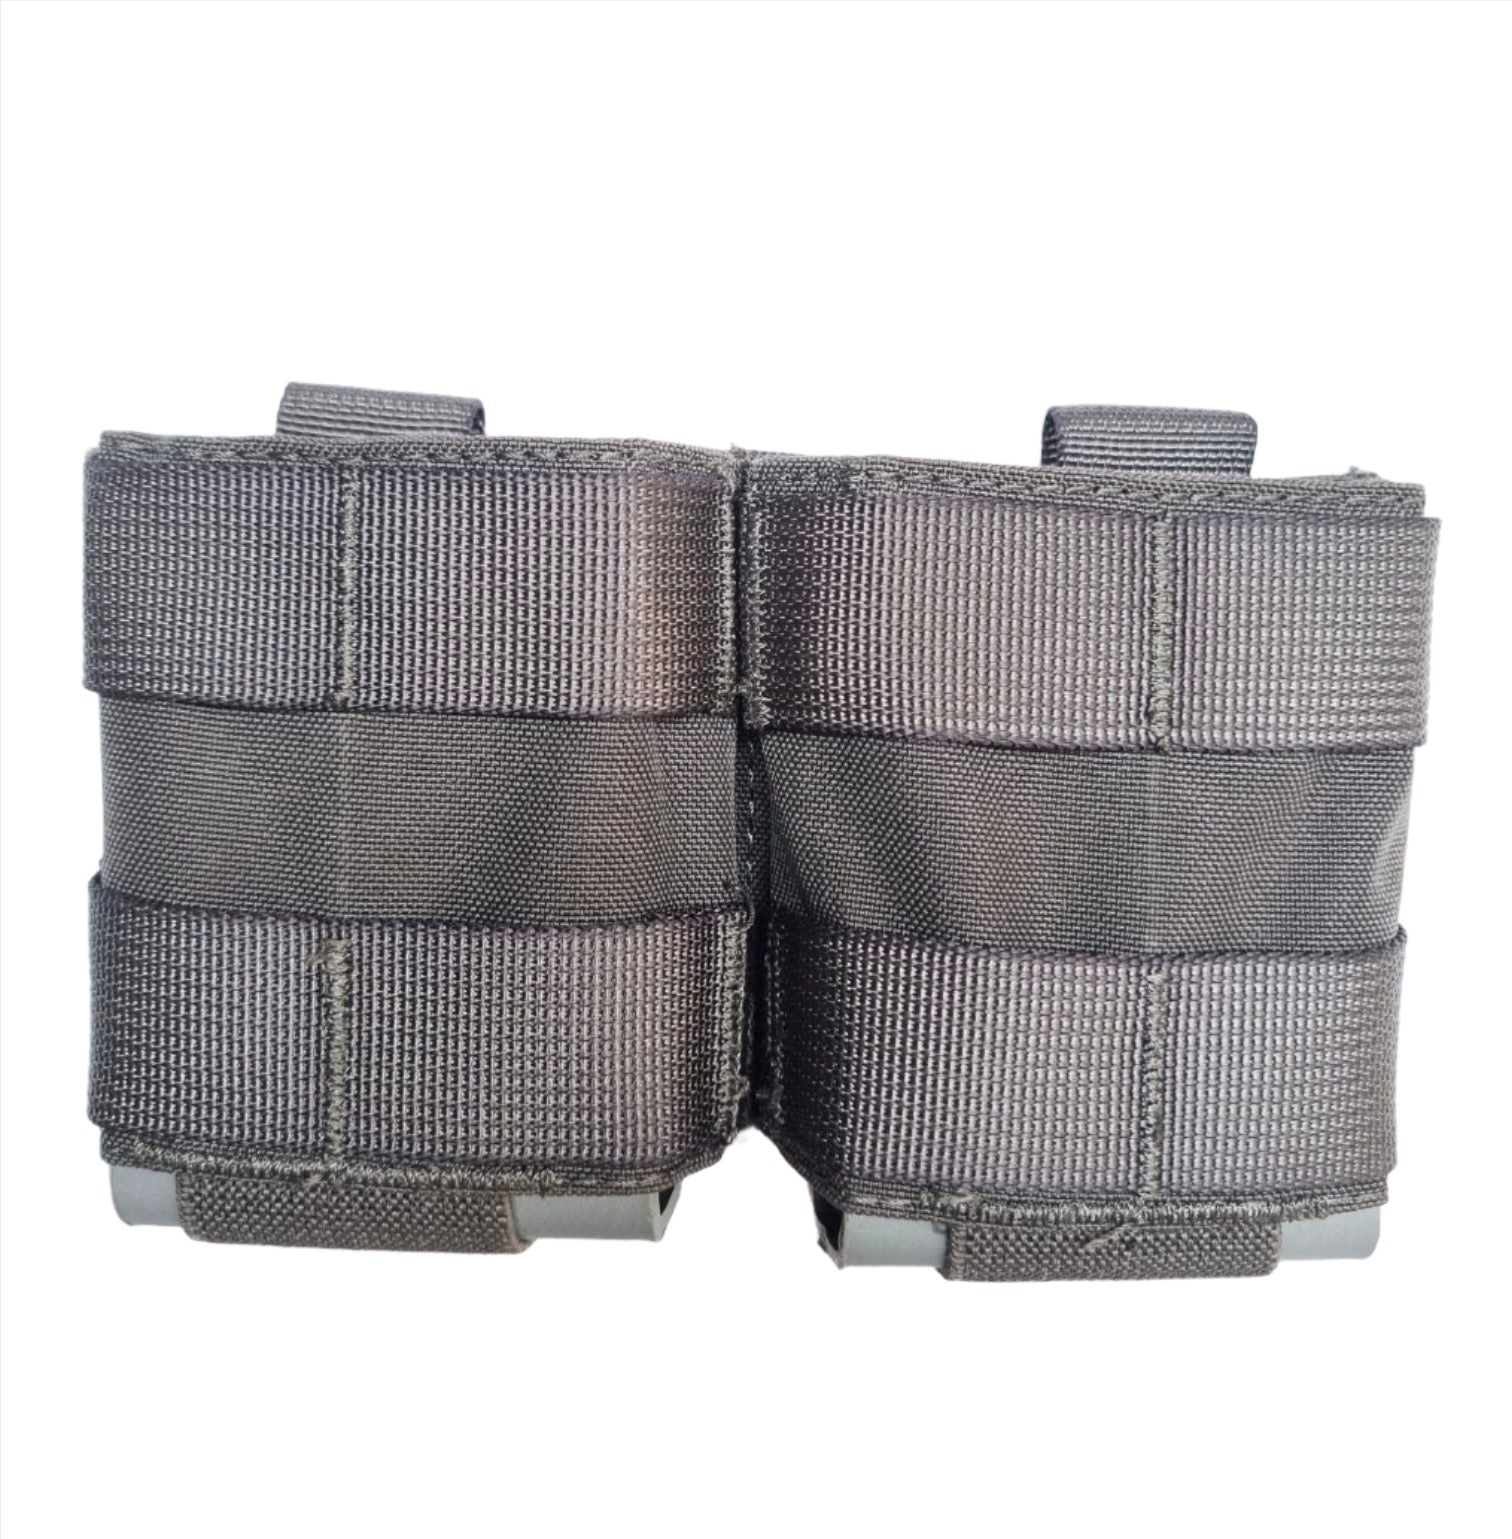 SHE-23032 GRIPTAC DOUBLE M4/M16 MAG POUCH GREY